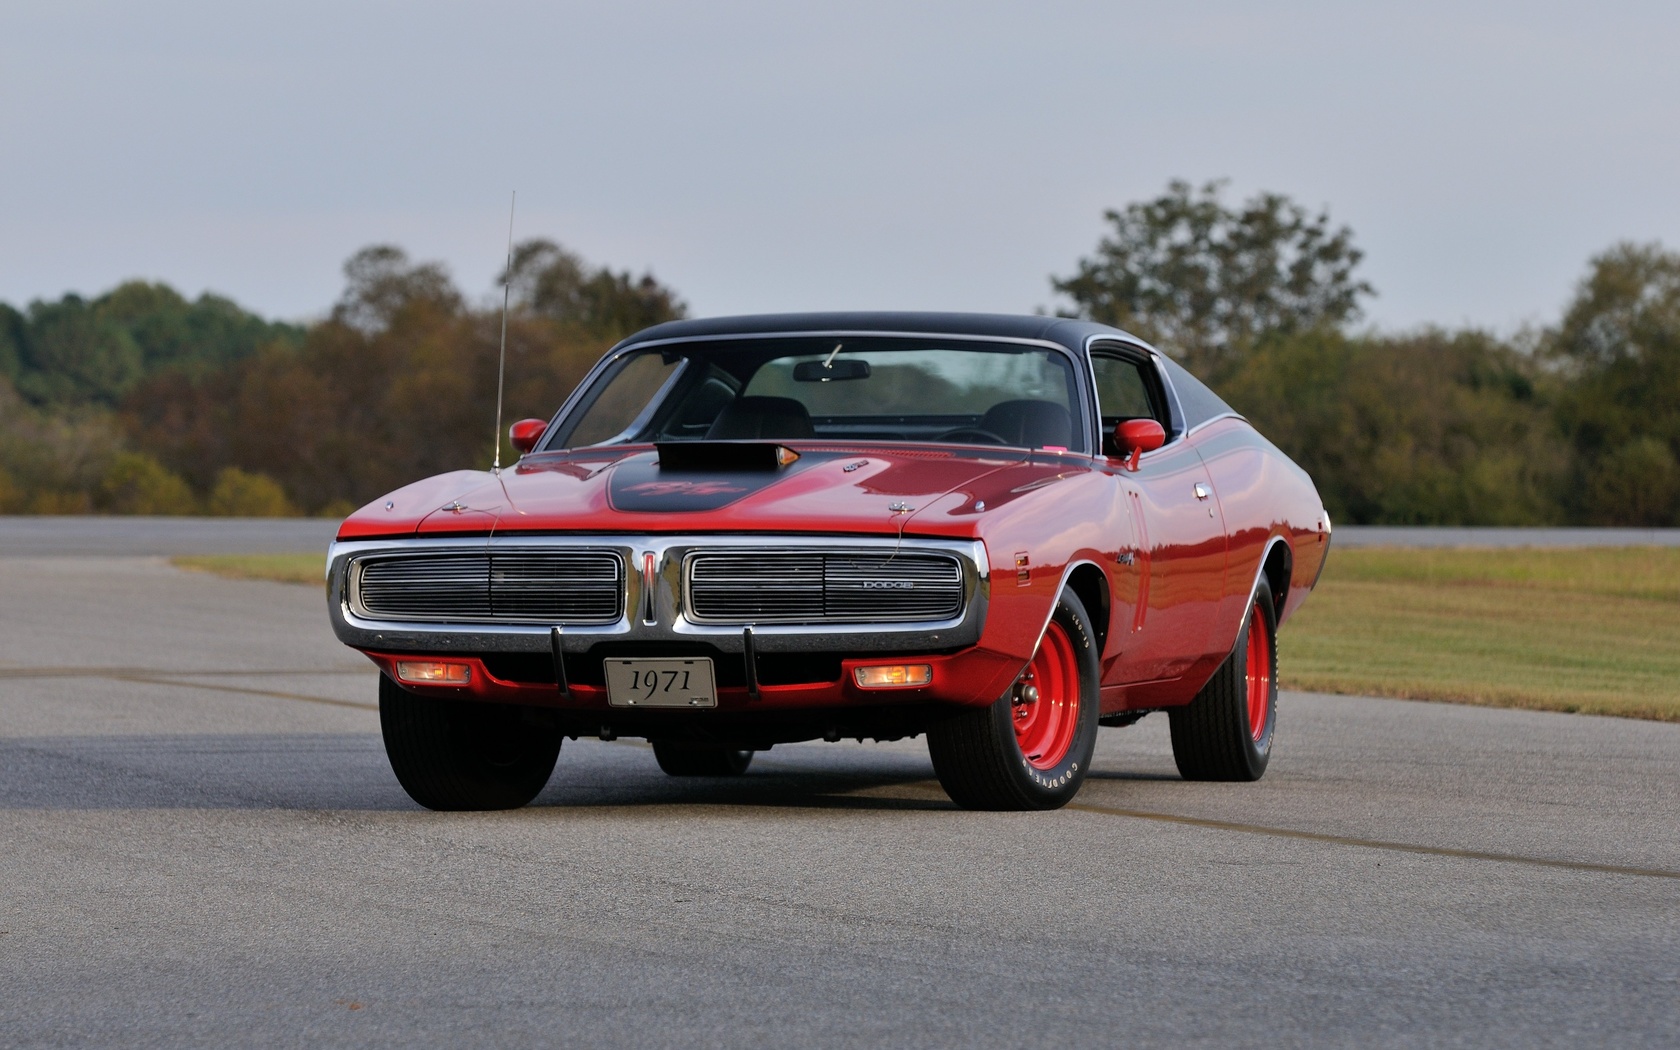 1971, dodge, hemi, charger, rt, pilot, car, red, muscle, classic, old